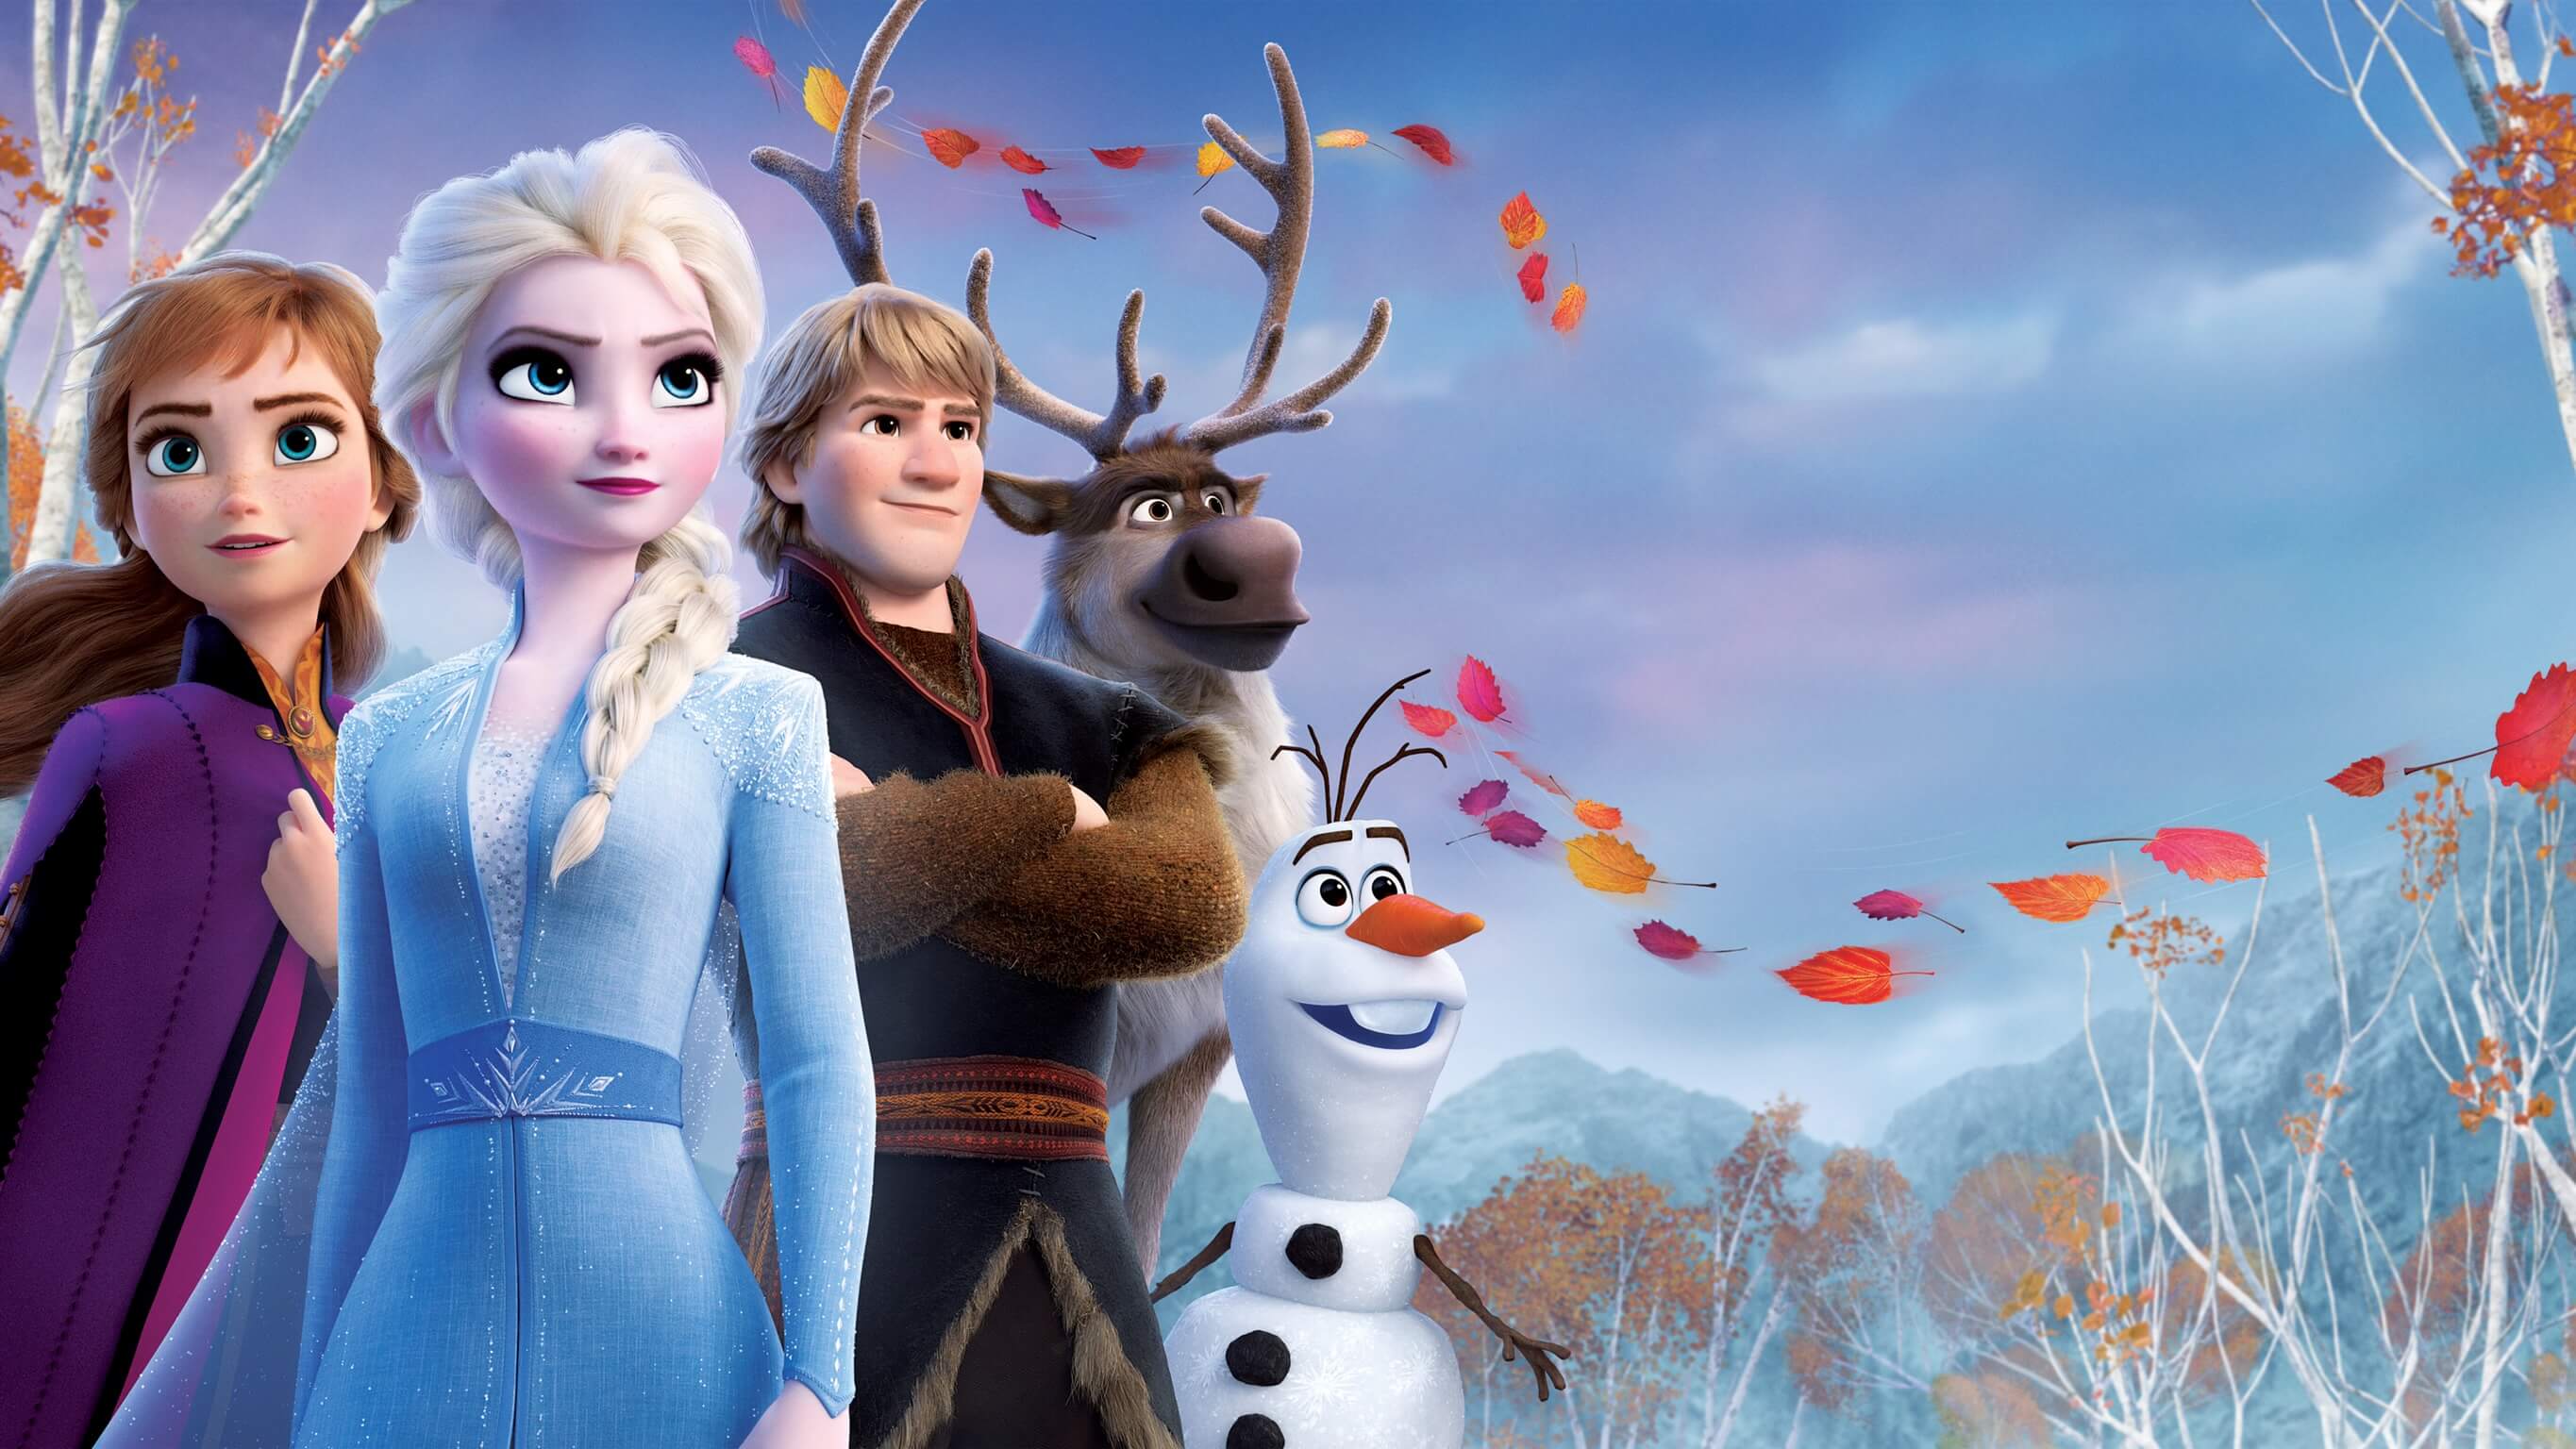 ‘Frozen 2’ Becomes The Sixth Disney Film of 2019 To Cross $ 1 Billion At The Worldwide Box Office